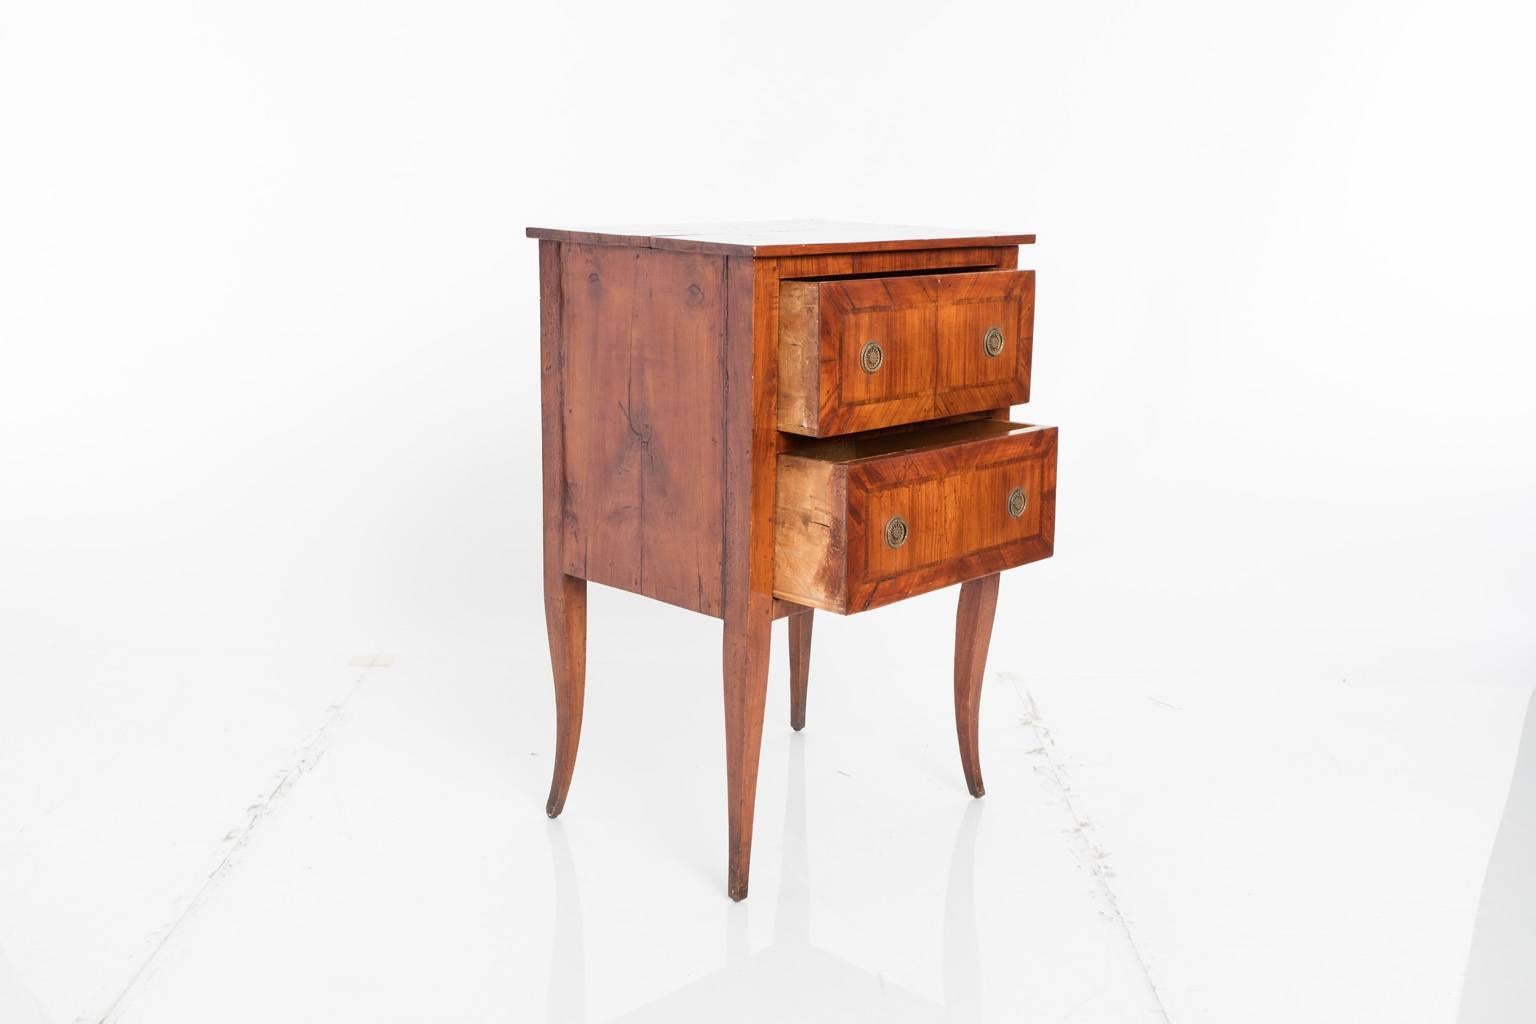 Directoire style, small two-drawer cabinet with inlay decorated drawers, and brass hardware.